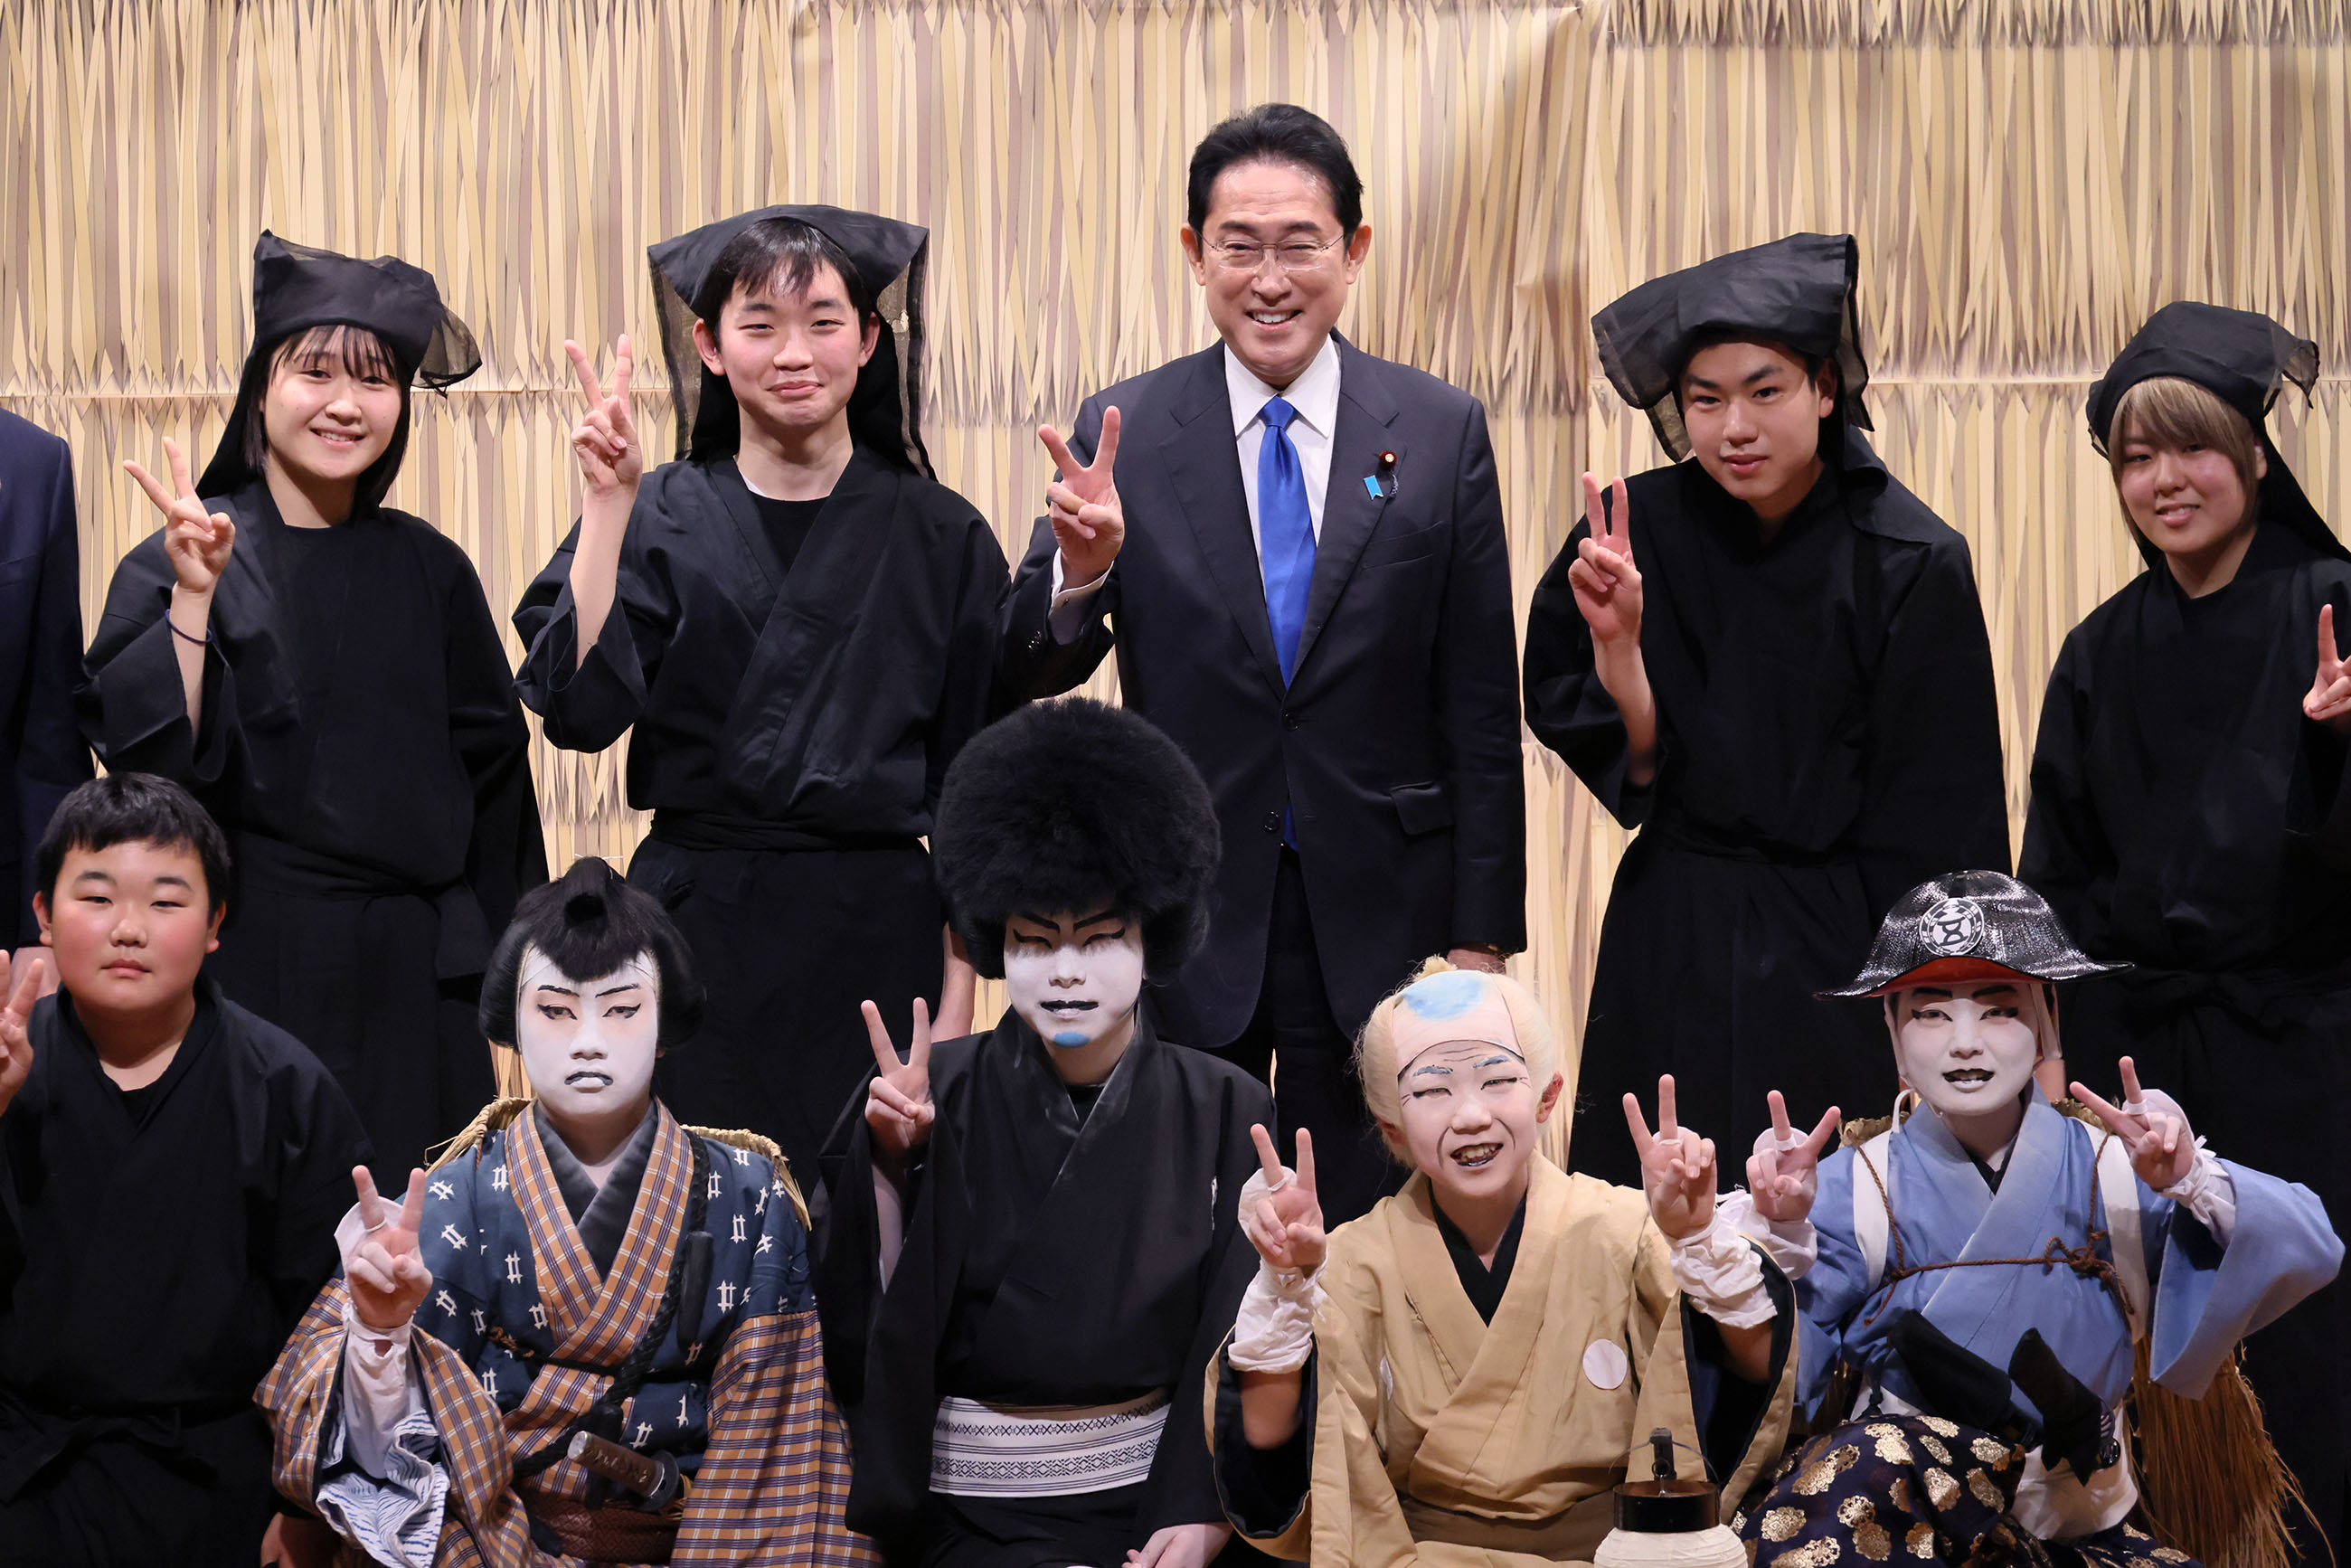 Commemorative photo session with kabuki performers